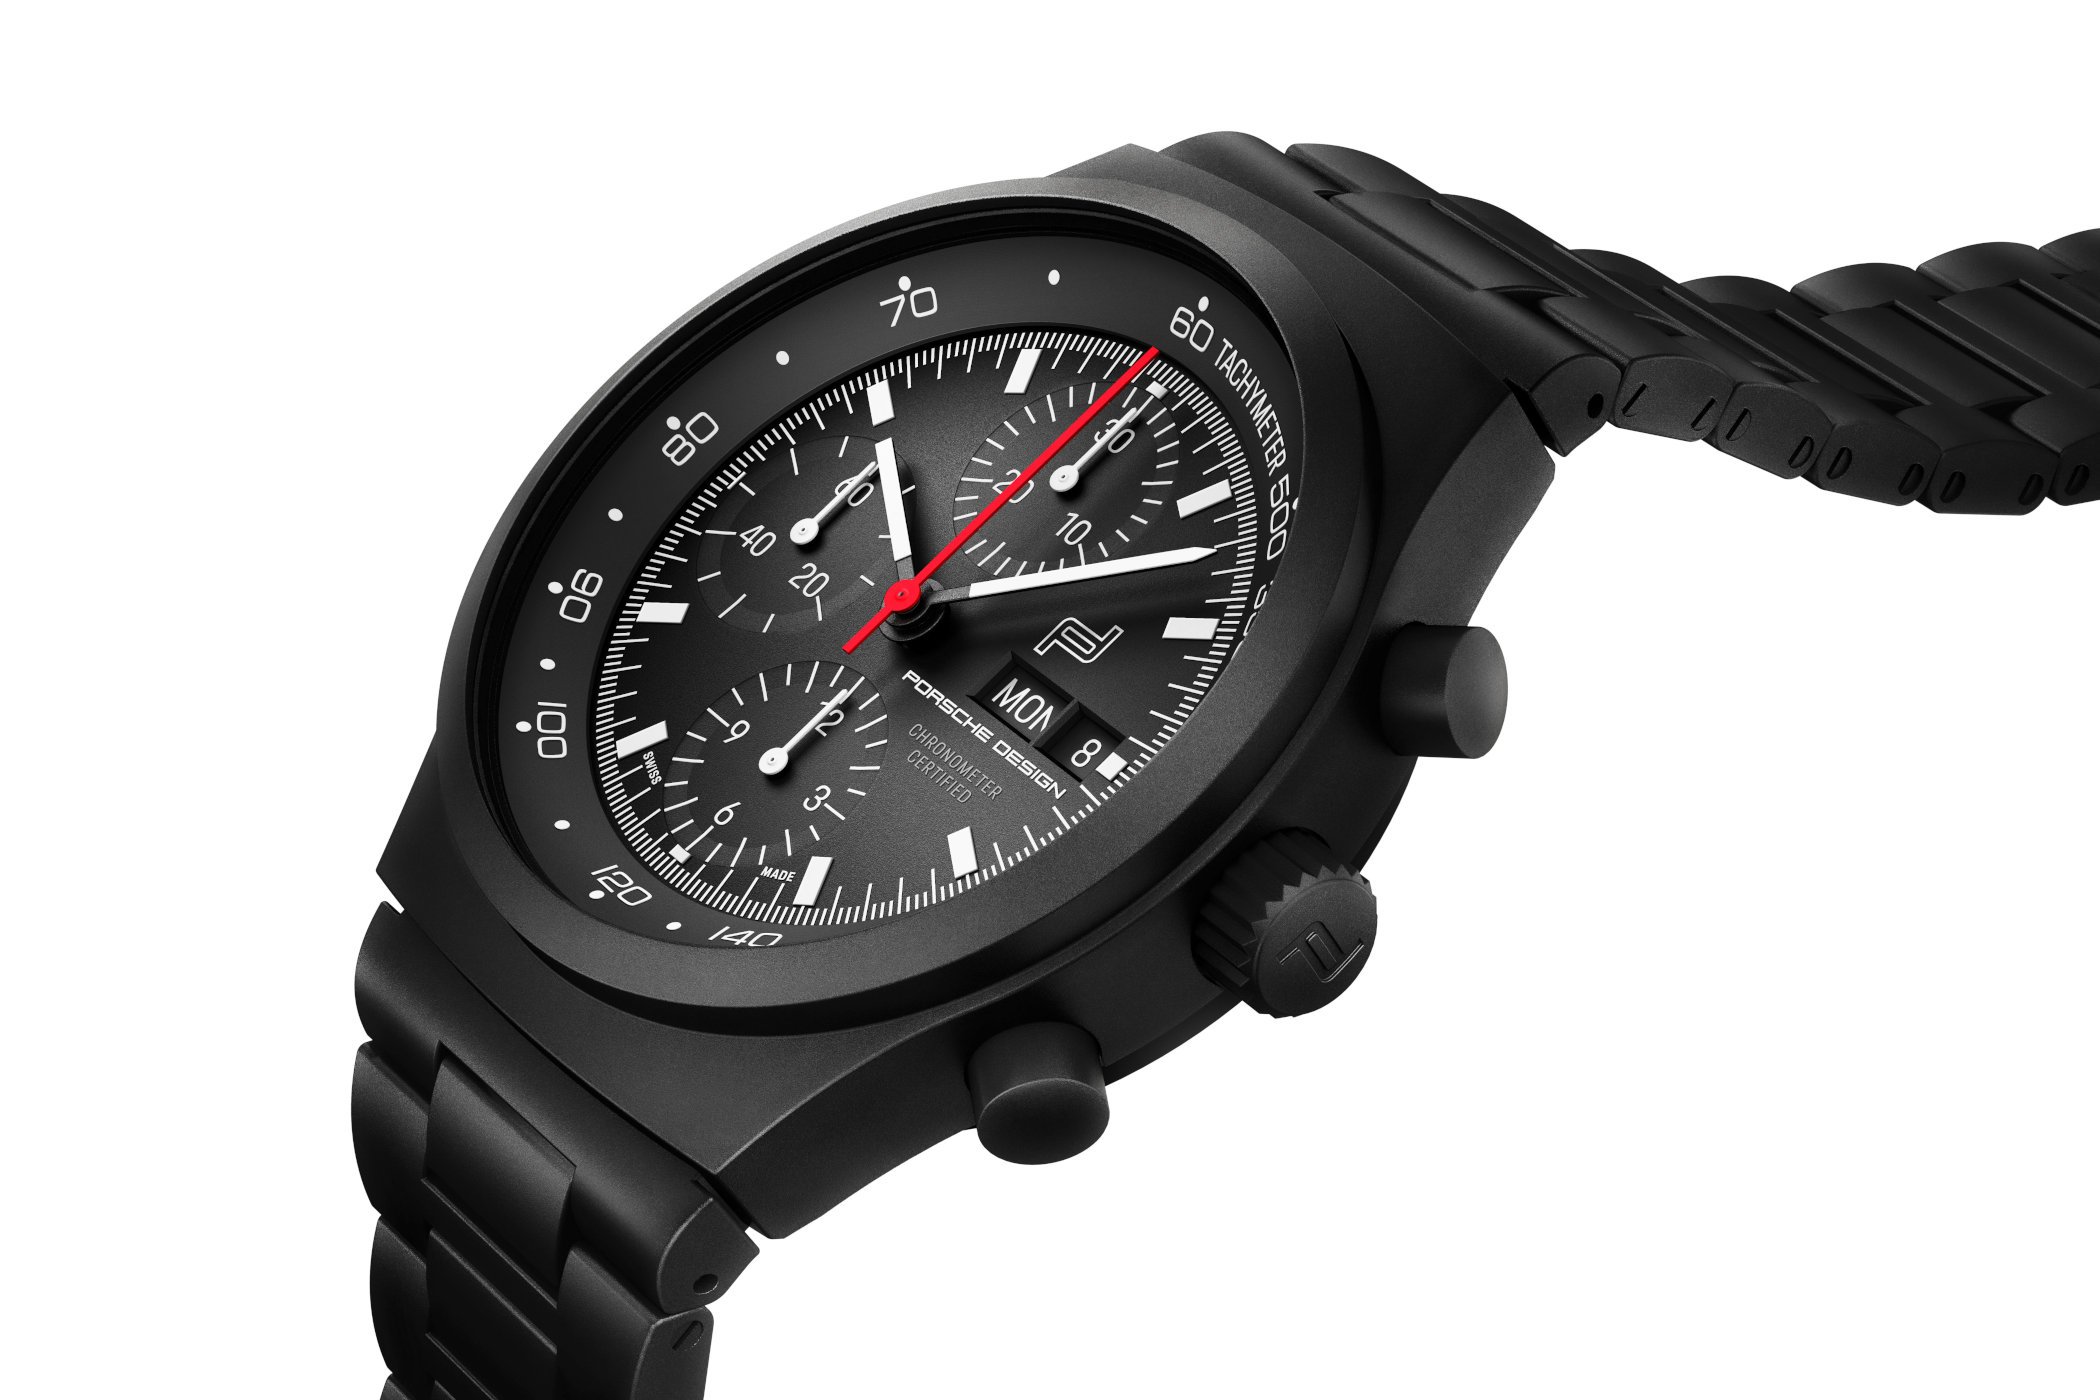 The Chronograph 1 joins the regular collection with small updates